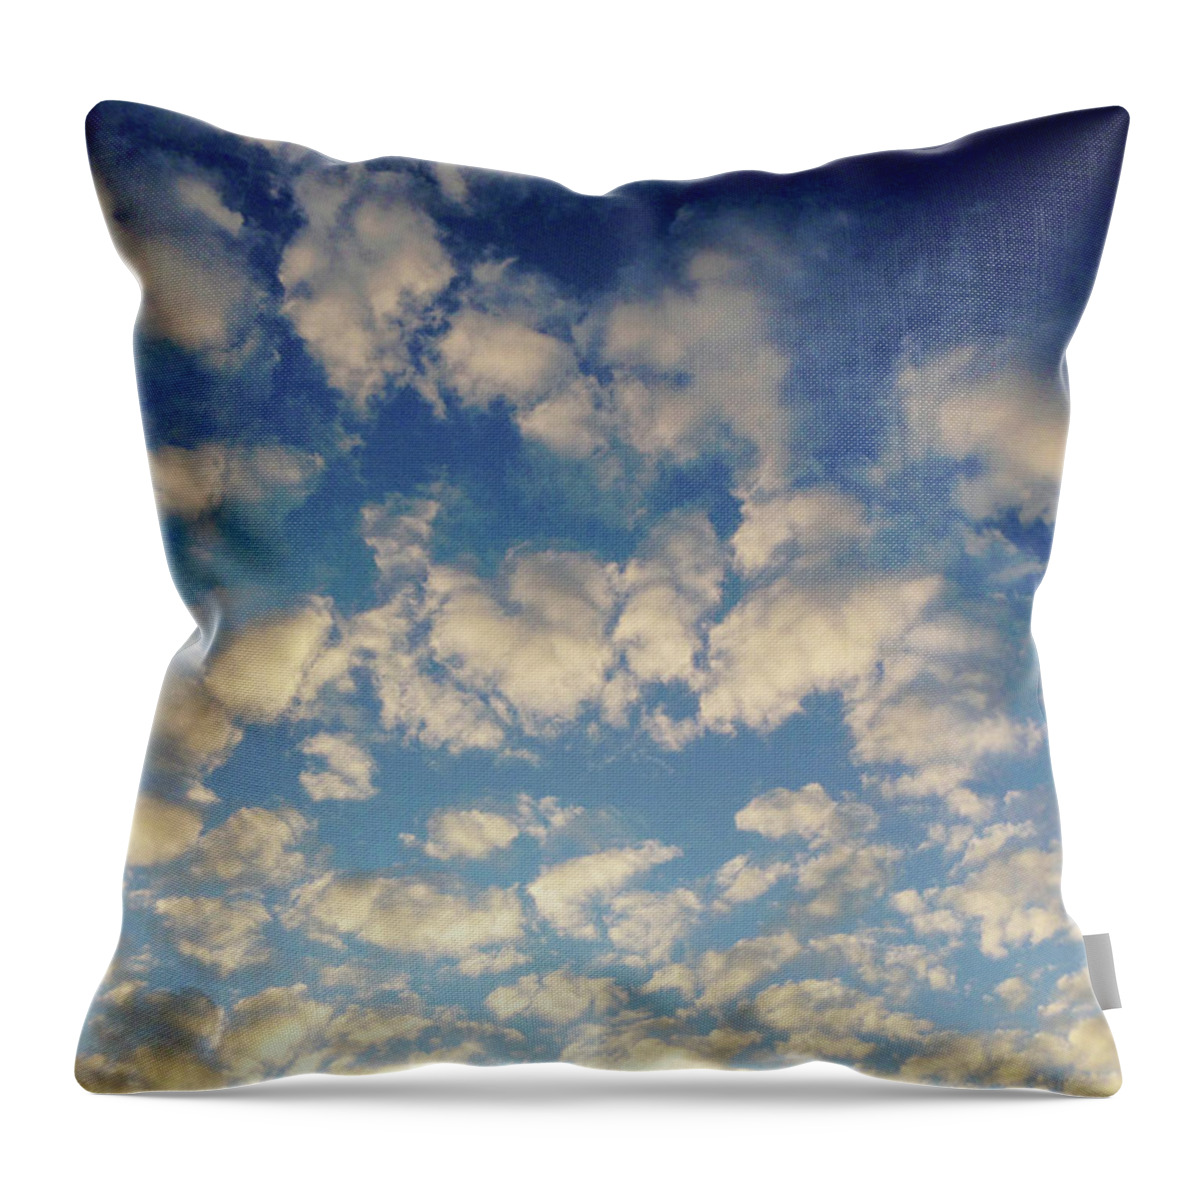 Sky Throw Pillow featuring the photograph Head In The Clouds- Art by Linda Woods by Linda Woods